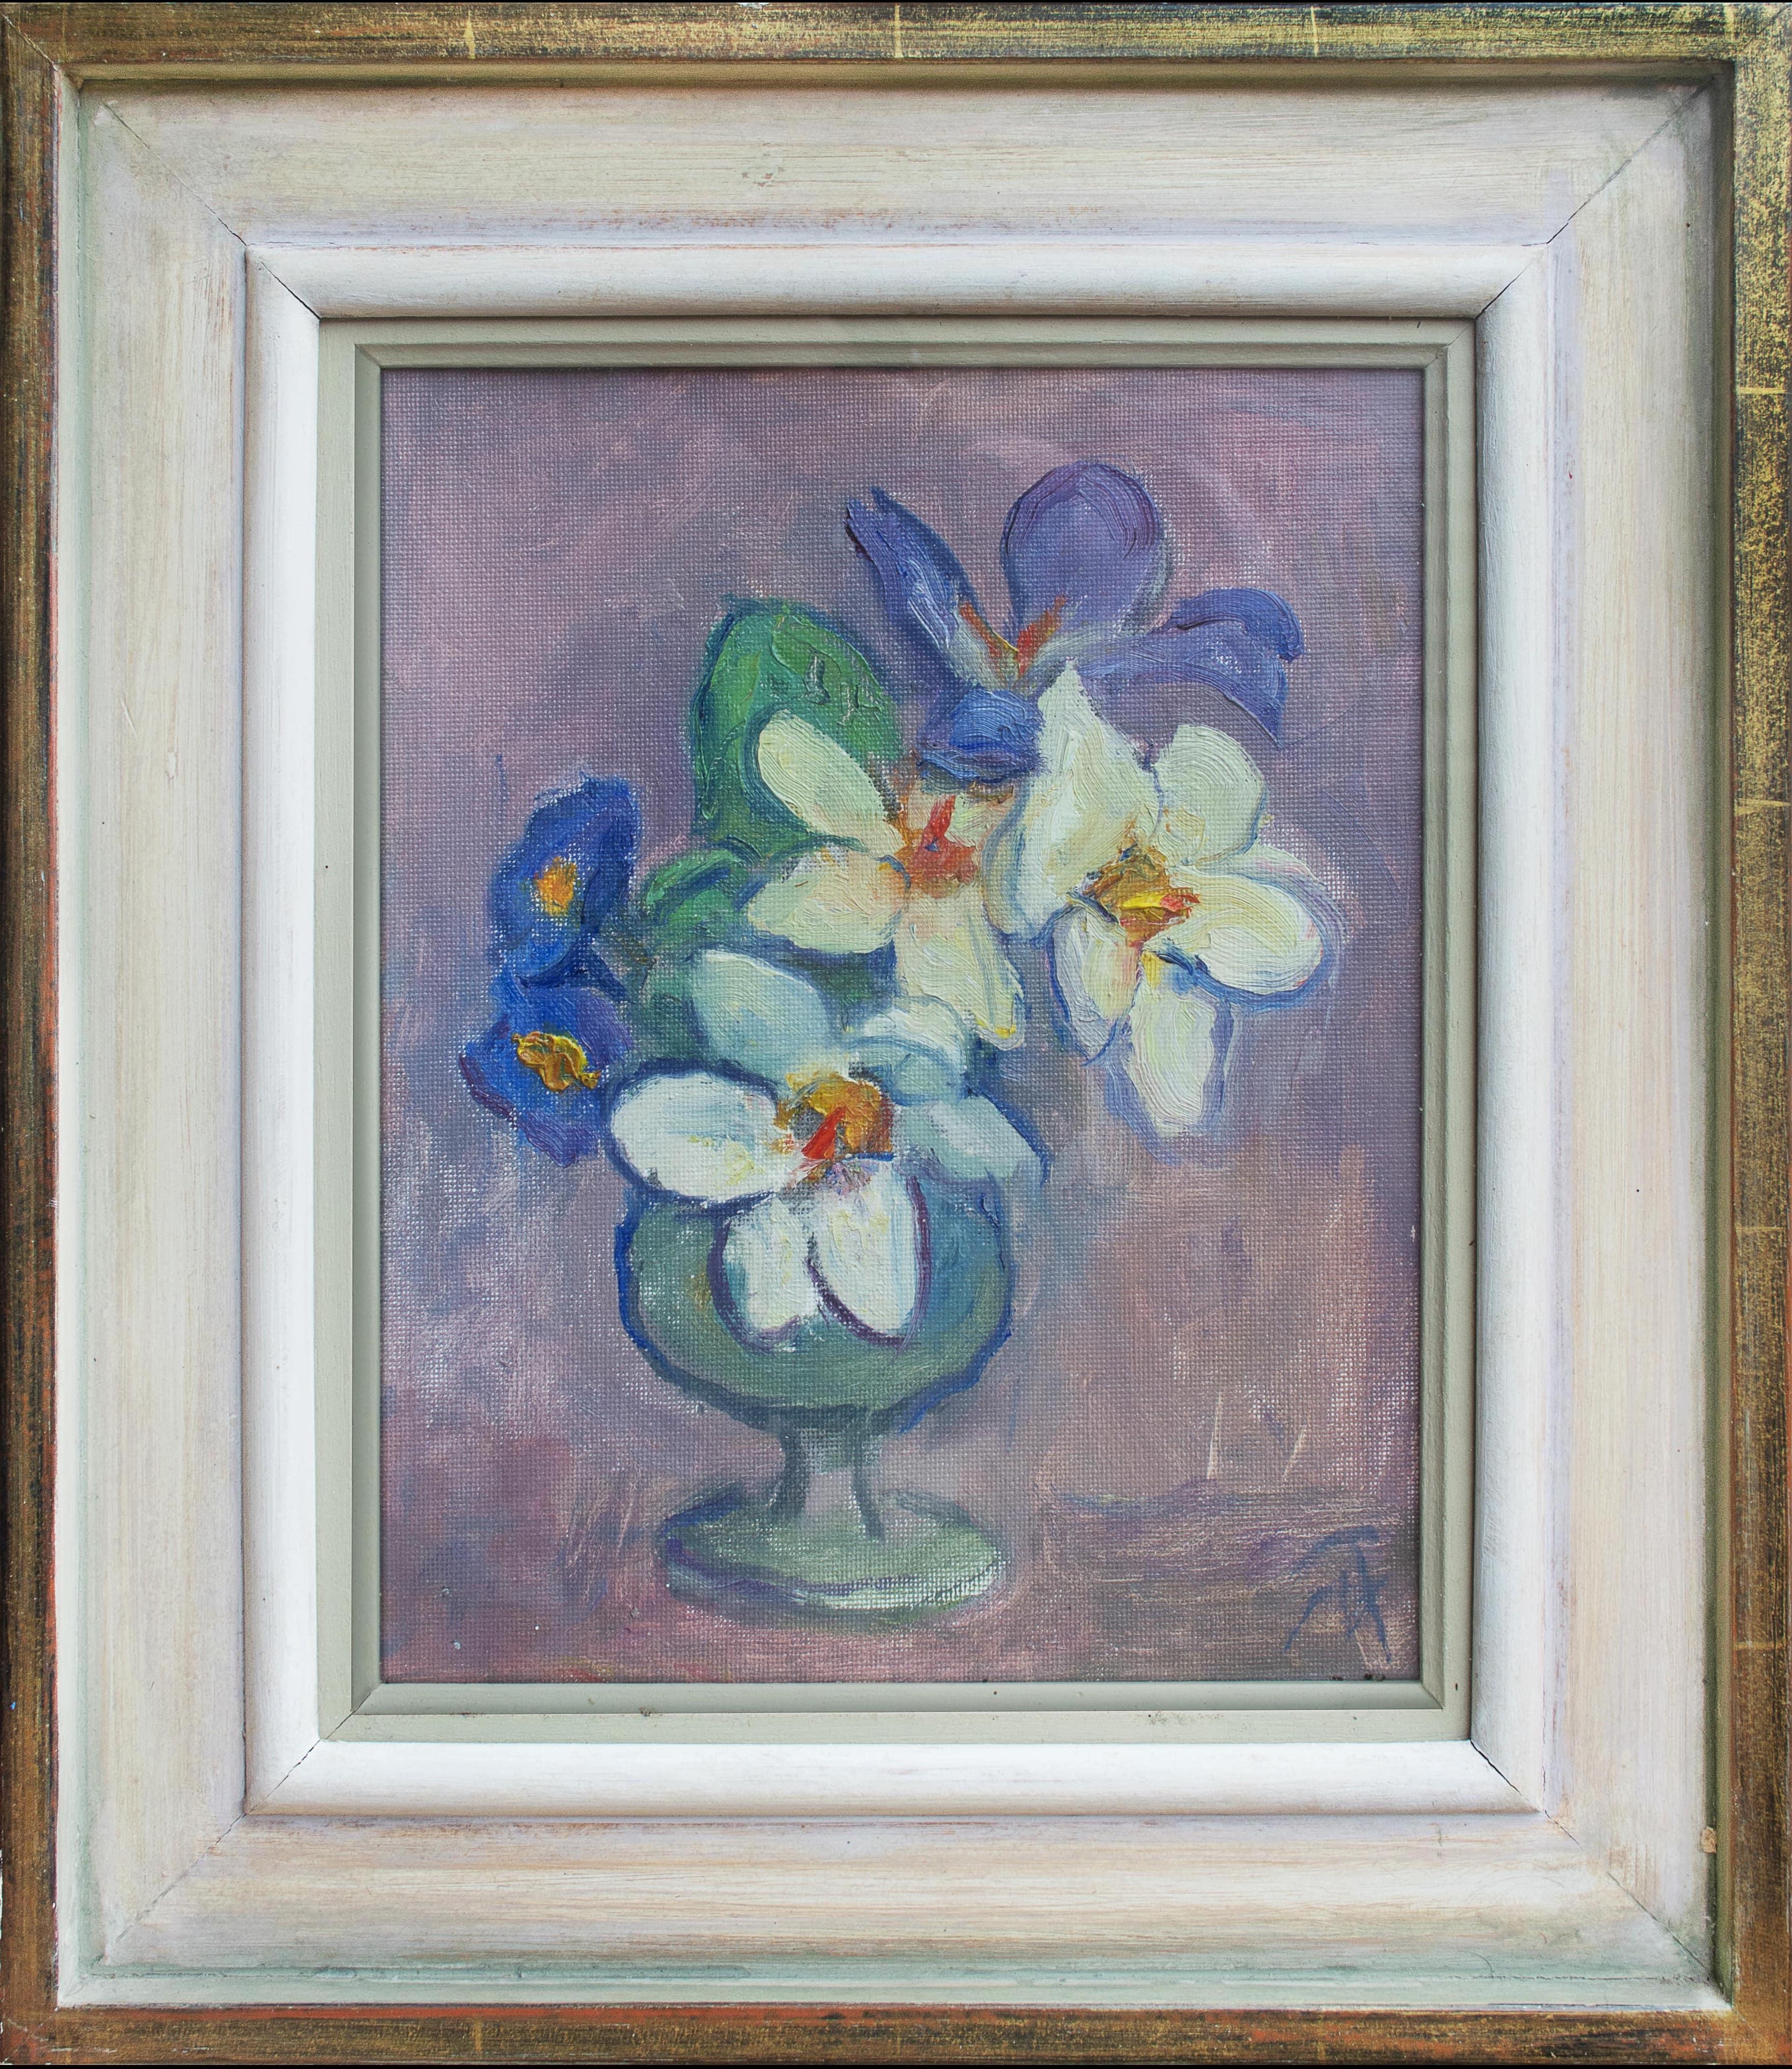 Margaret Thomas Abstract Painting - Matisse Ref Oil on Canvas Vase Abstract Blue White Flowers Woman Artist RA Slade